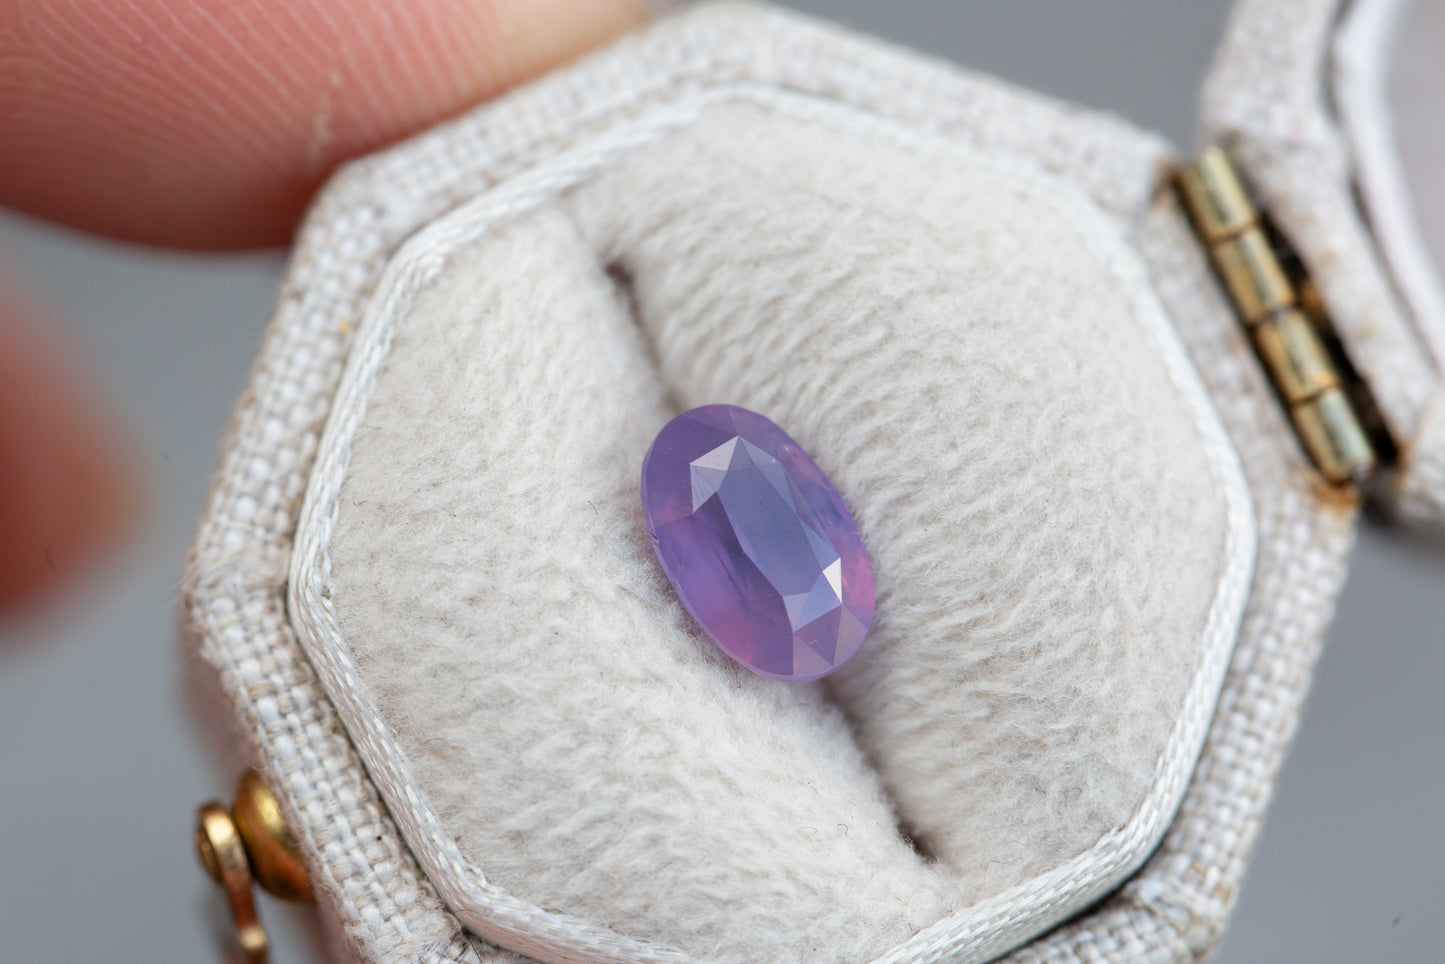 Load image into Gallery viewer, 1.55ct oval opalescent purple sapphire
